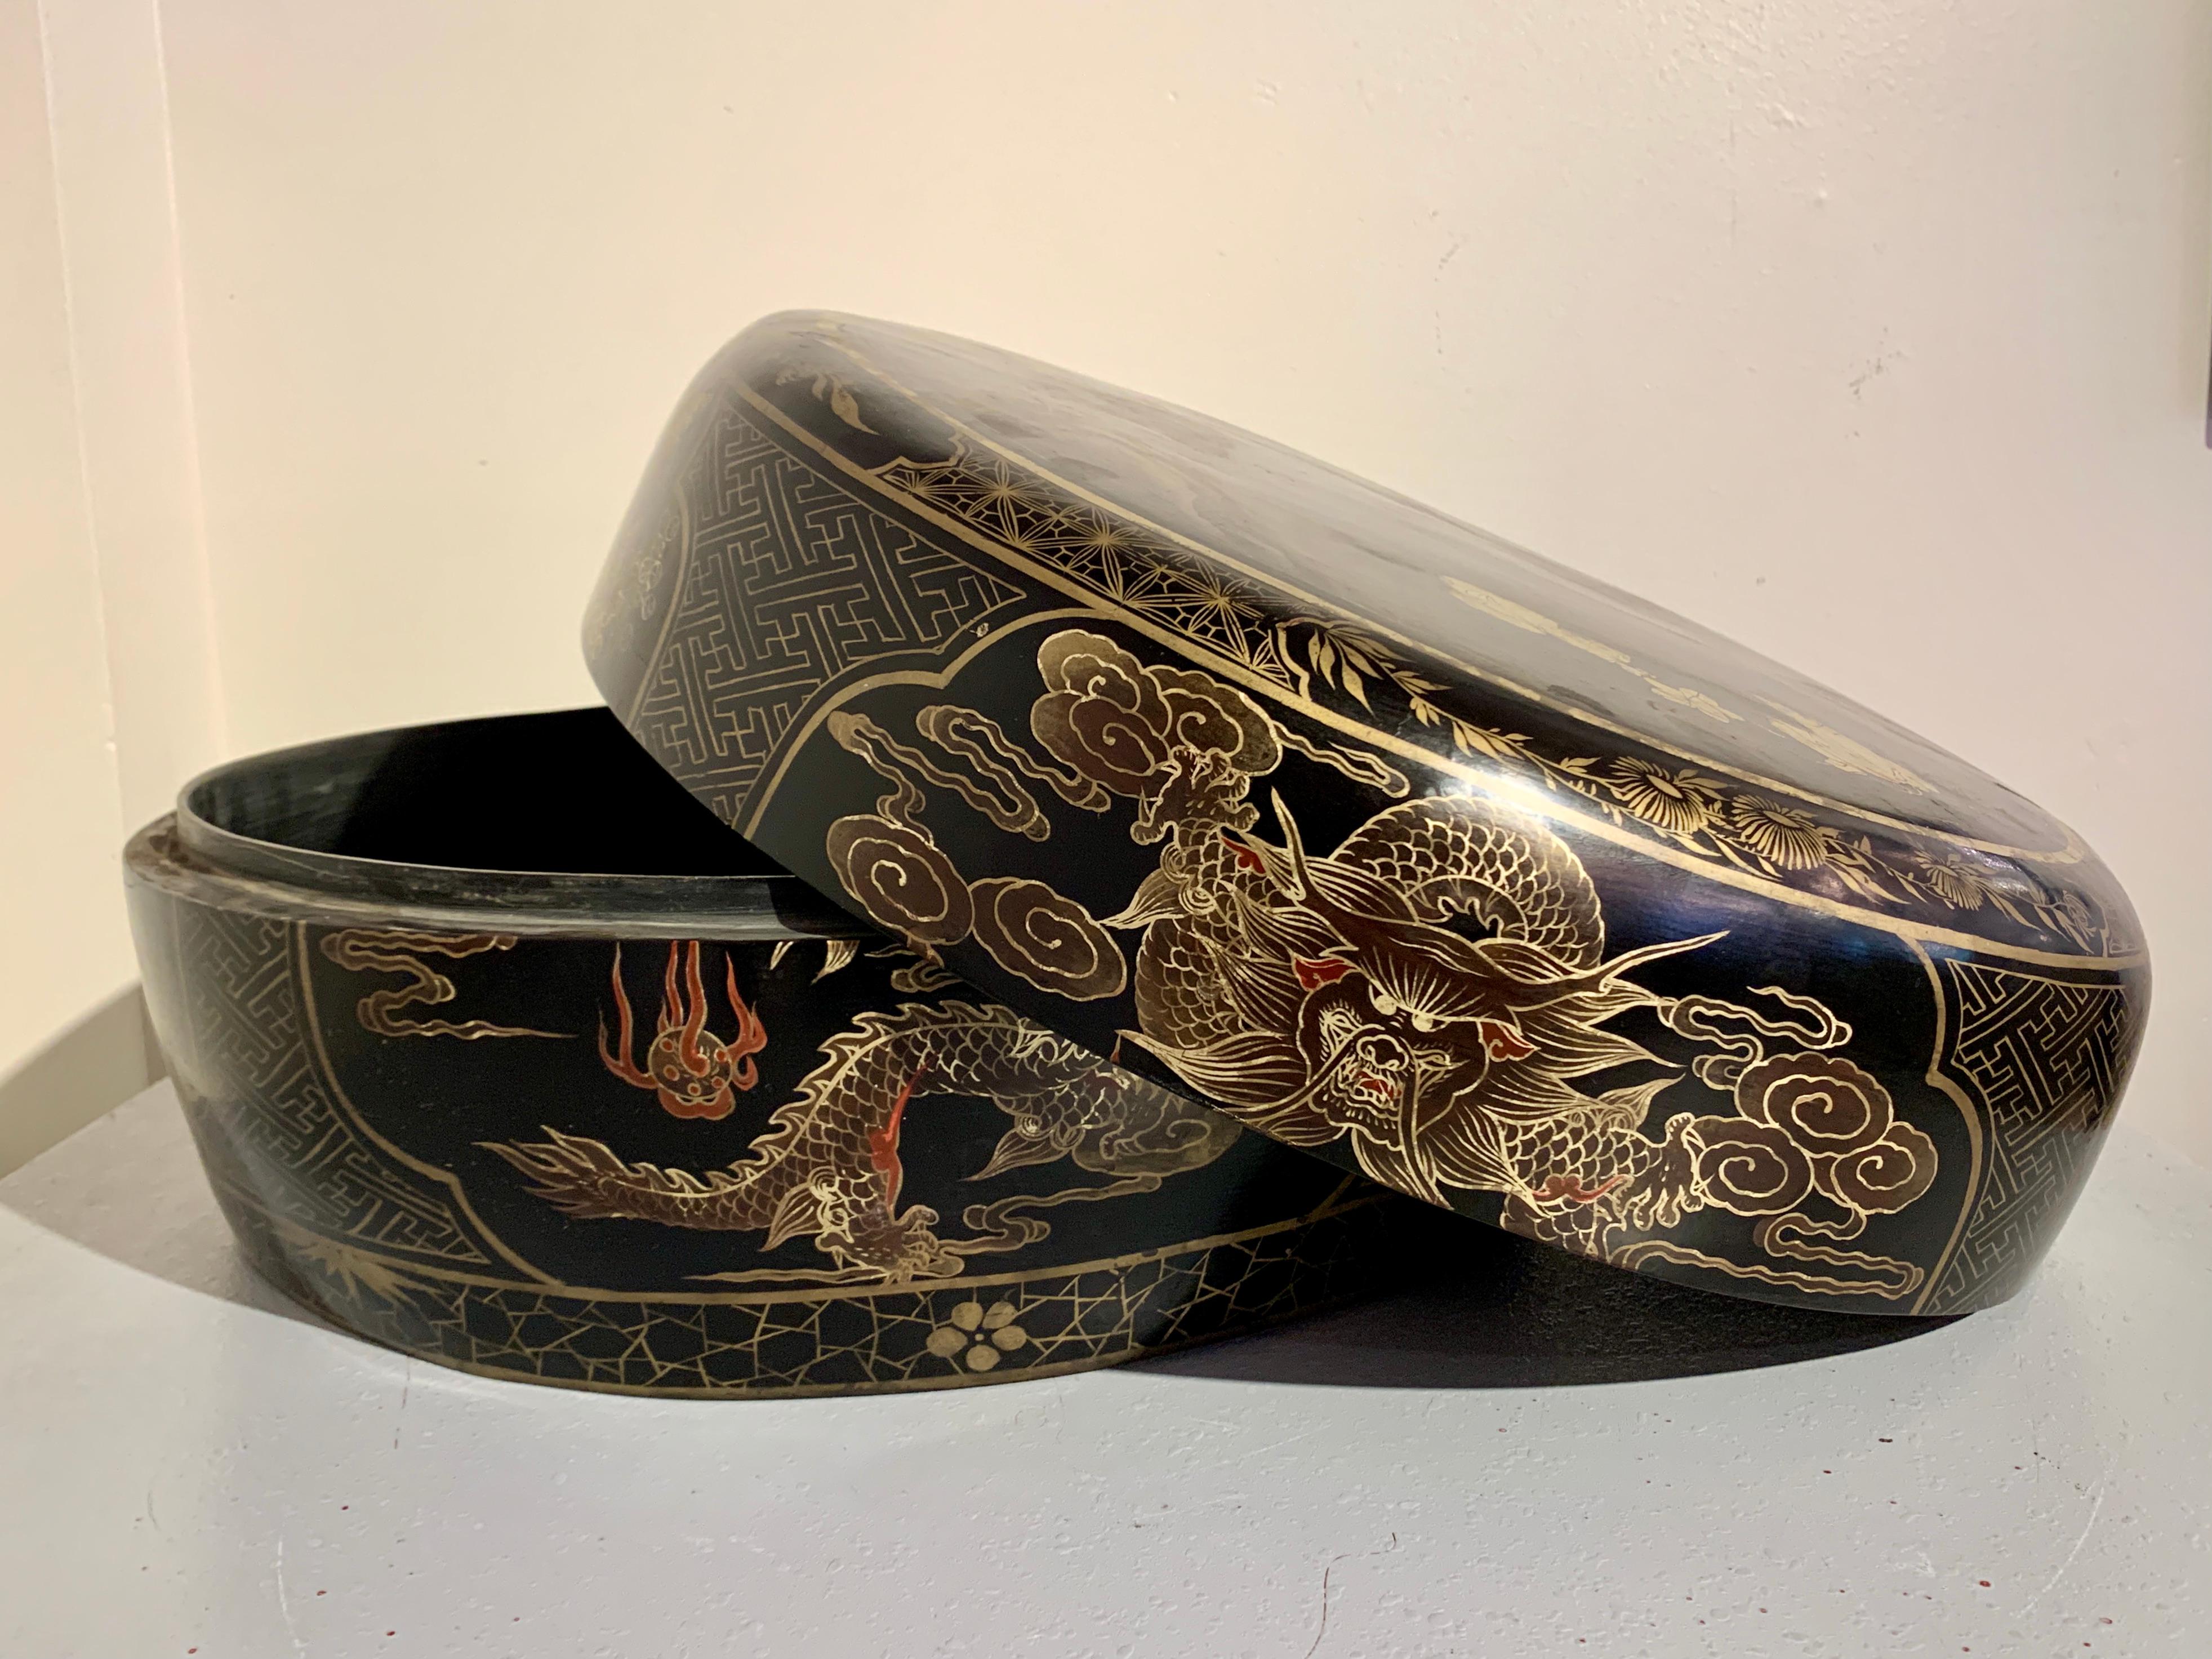 A very large Chinese round black lacquer and gilt painted box, made for the export market, mid 20th century, China.

The round black lacquer box of impressive proportions, and decorated with beautiful gilt painting. The top of the box features a